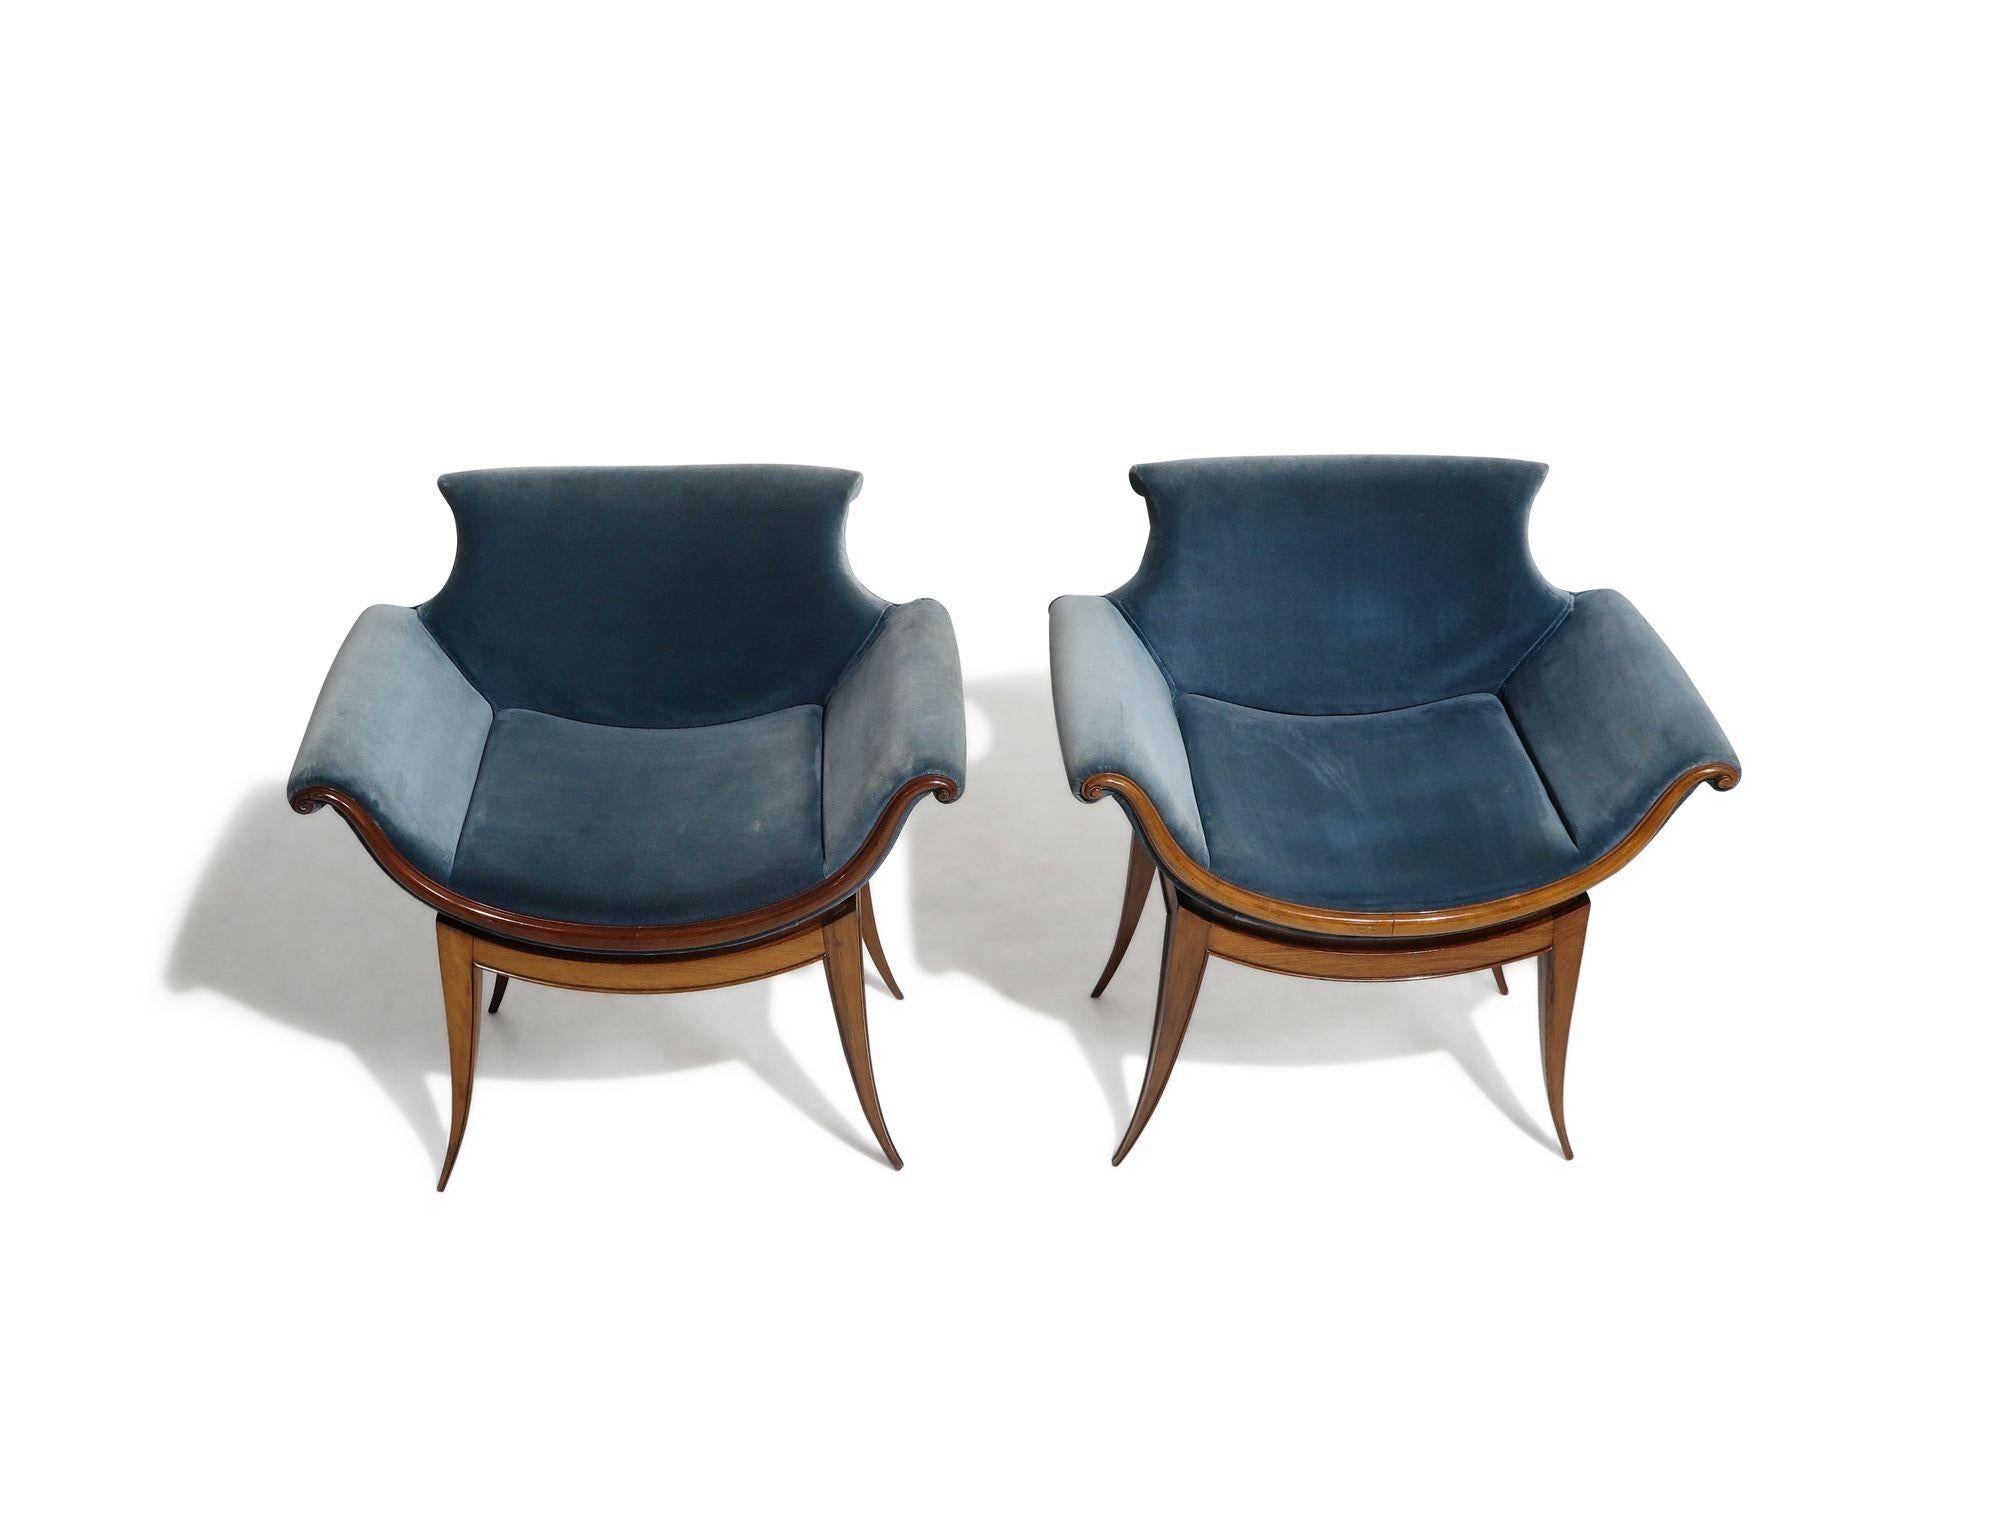 Unique pair of midcentury lounge chairs handcrafted of caviuna wood with dramatic saber legs, upholstered in a vintage blue velvet. 
Good condition with age related wear. 
Measurements 
W 28.50'' x D 23'' x H 29''
Seat height 18''.